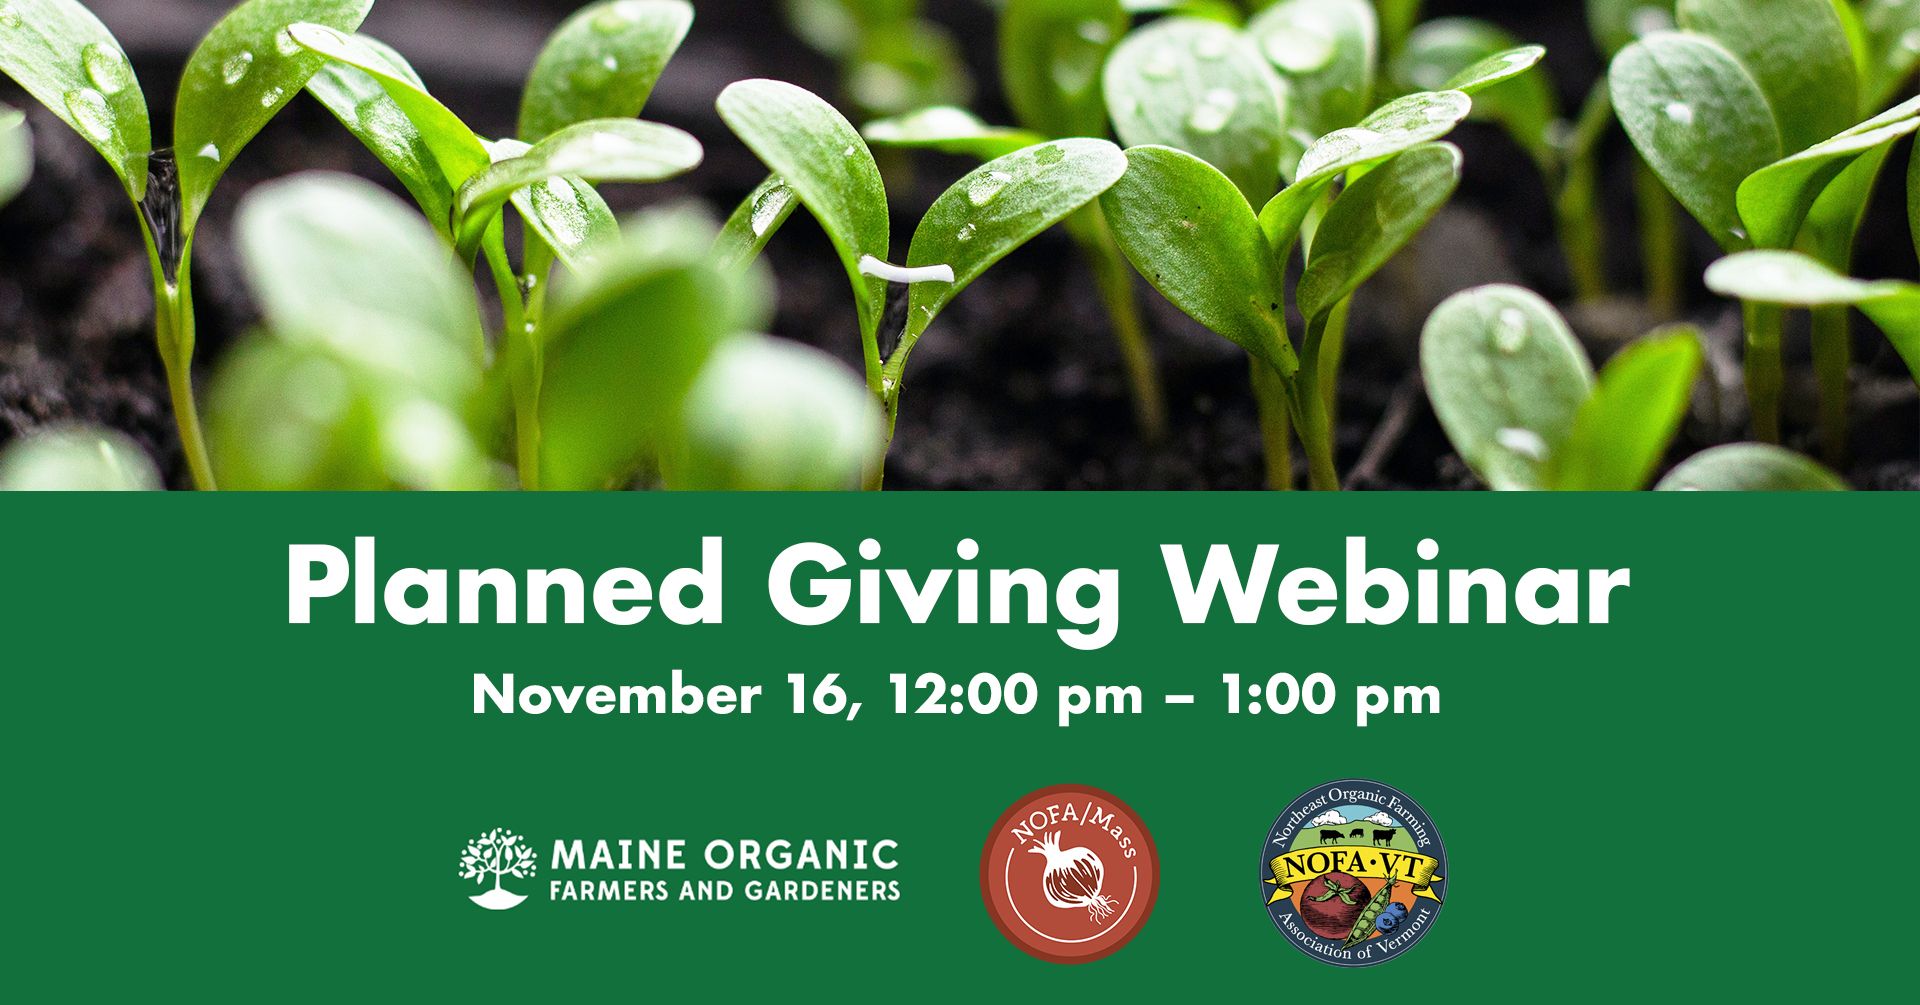 An image of seedlings on the top have with a green banner on the bottom half stating "Planned Giving Webinar, November 16, 12:00pm-1:00pm"